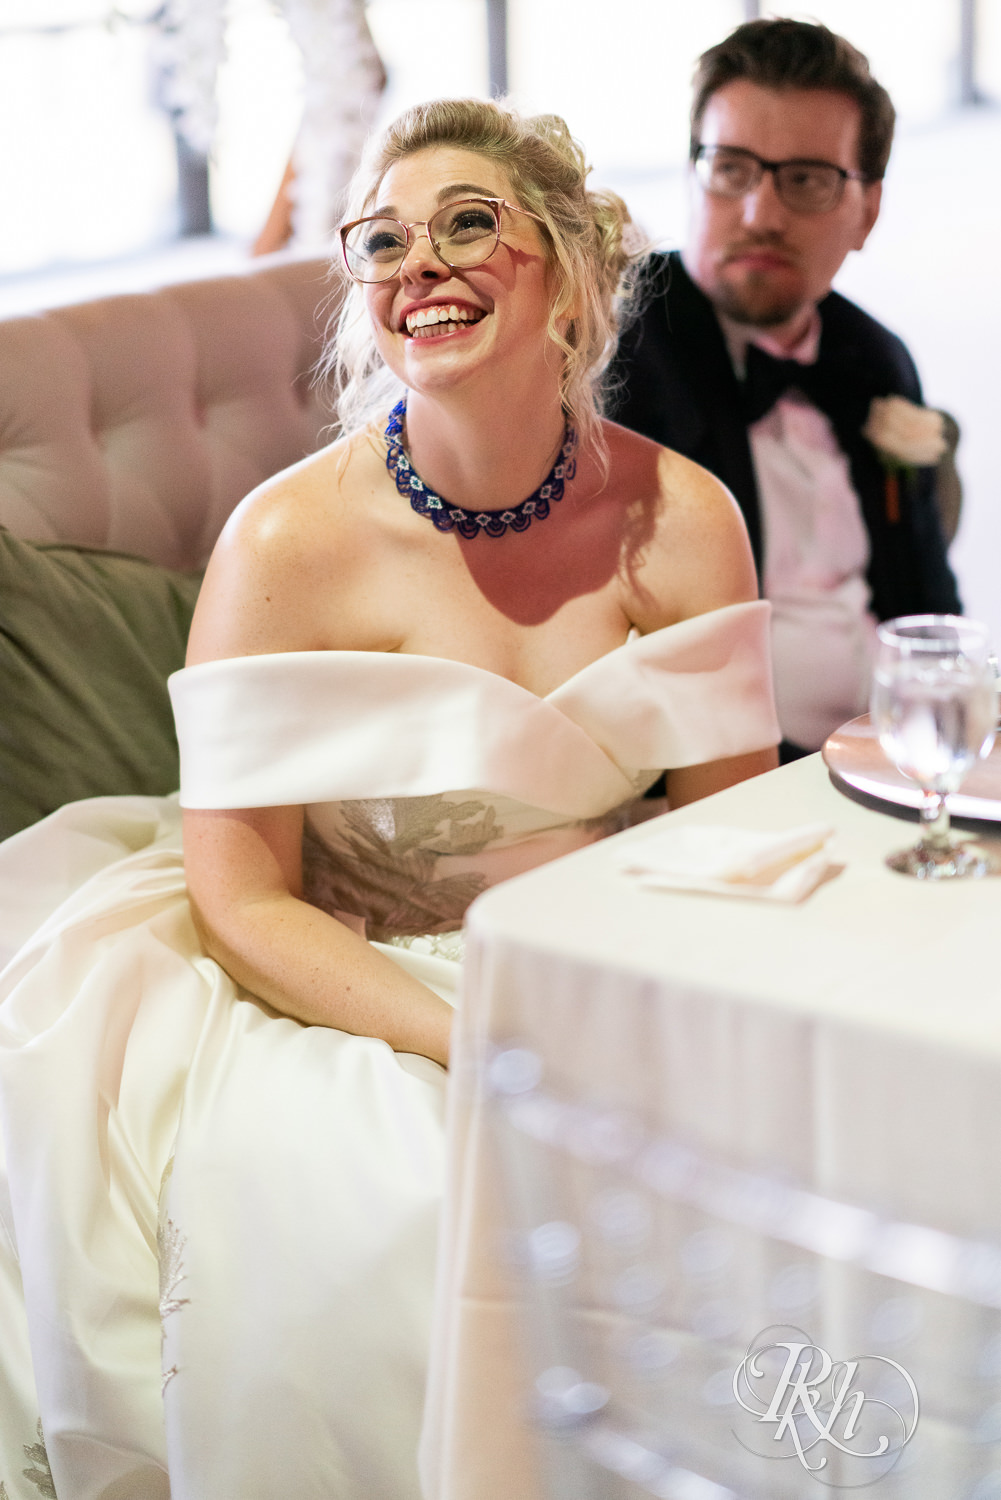 Bride laughs candidly at reception inside Abulae in Saint Paul, Minnesota.